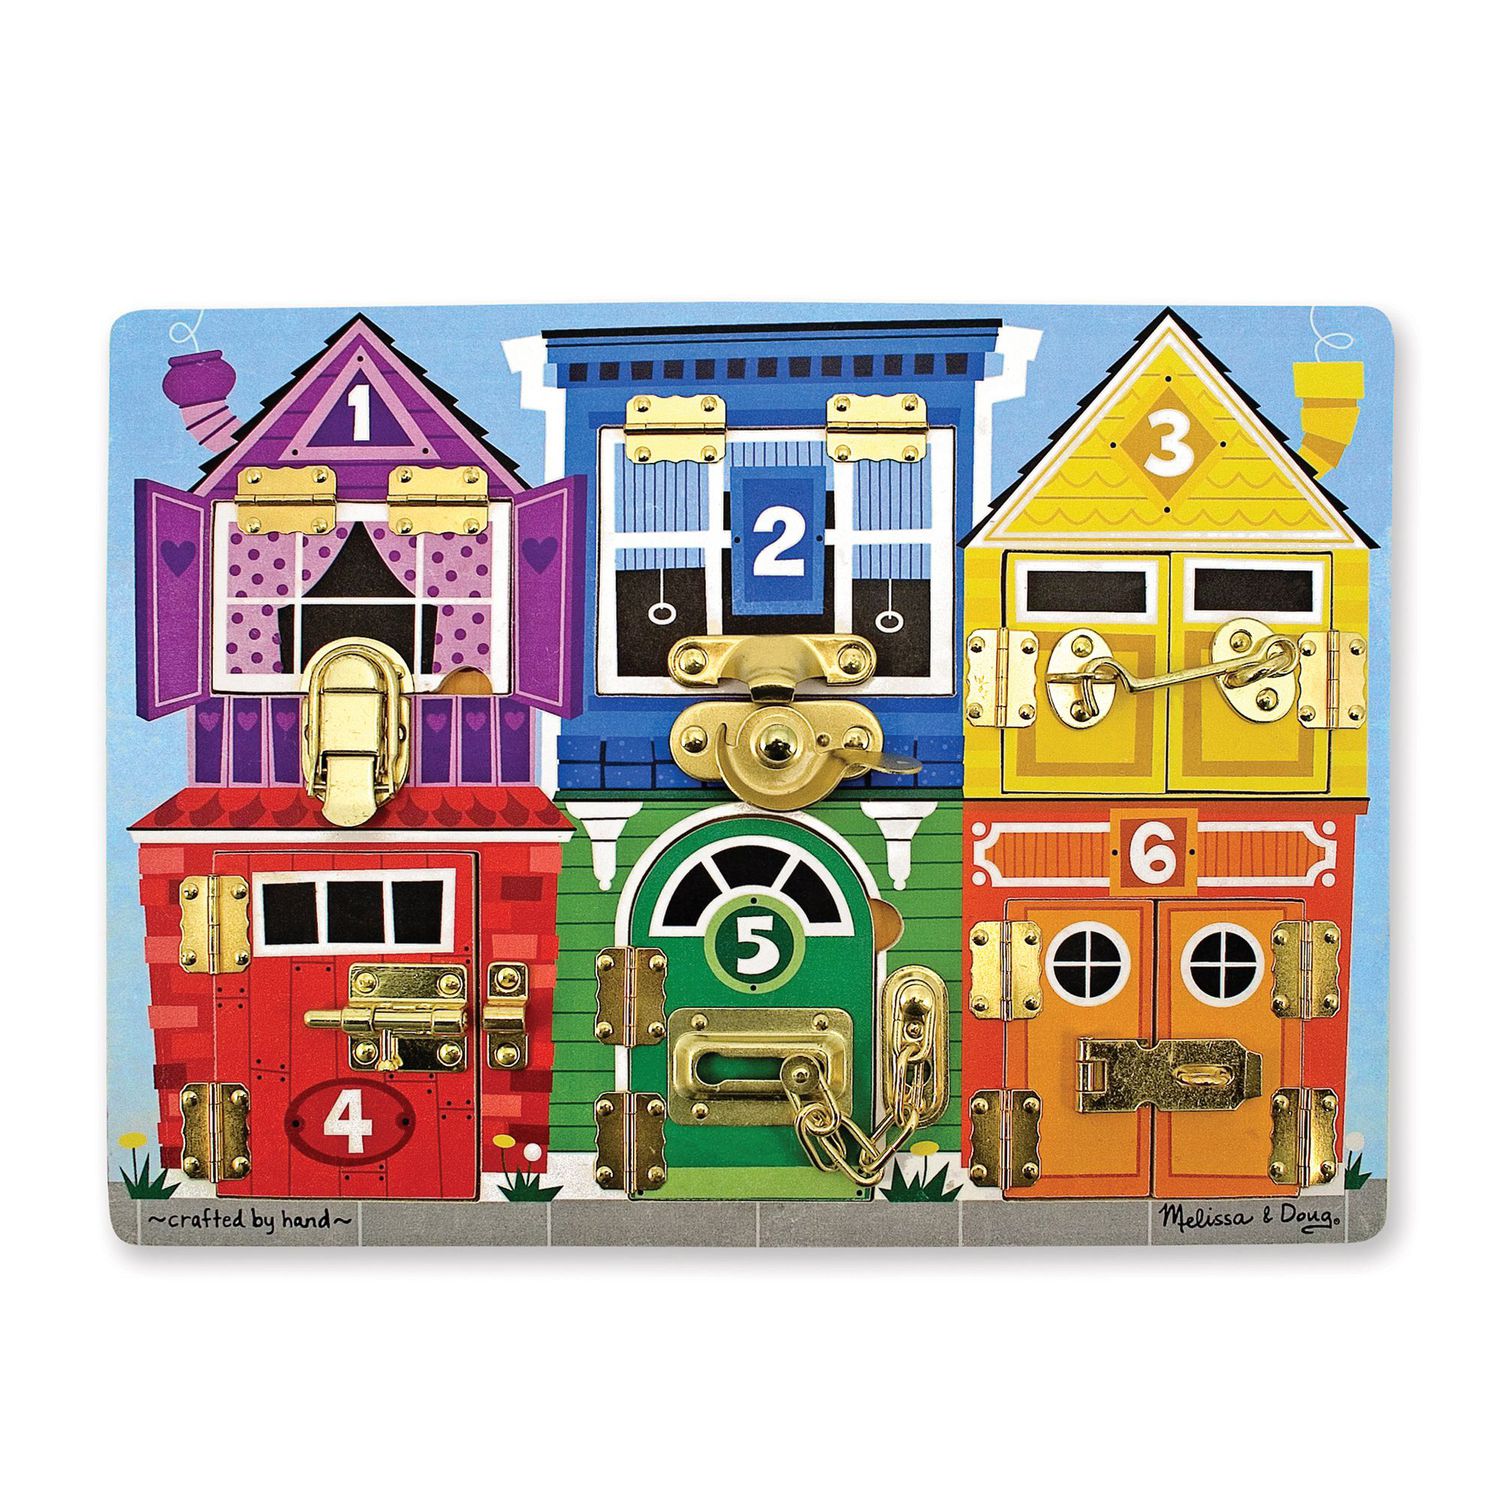 melissa and doug cube puzzles